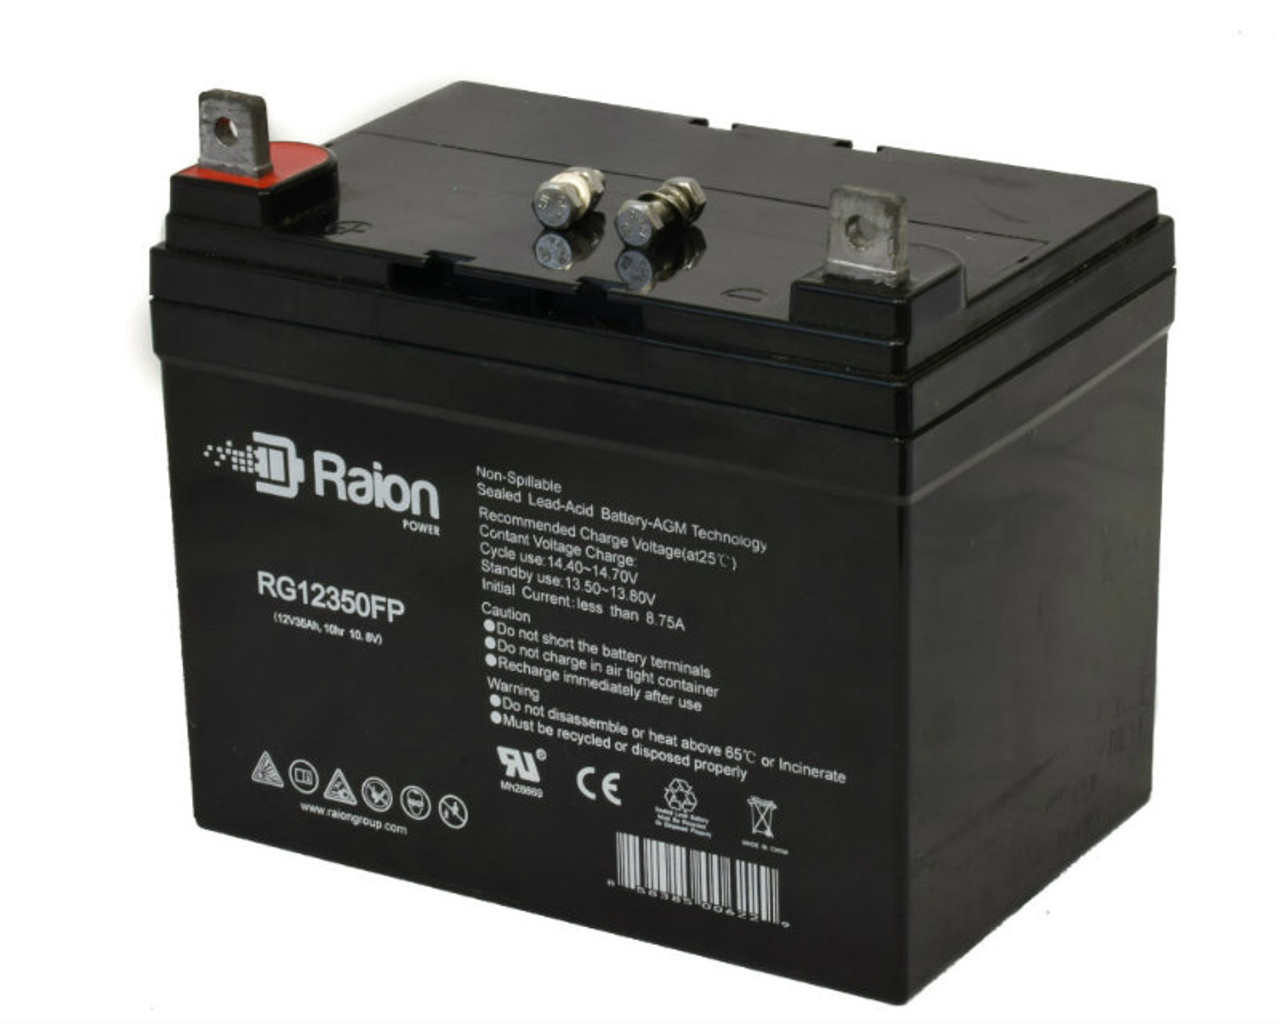 Raion Power Replacement 12V 35Ah RG12350FP Mobility Scooter Battery for Orthofab/Lifestyles (Fortress Wheelchairs) 755FS